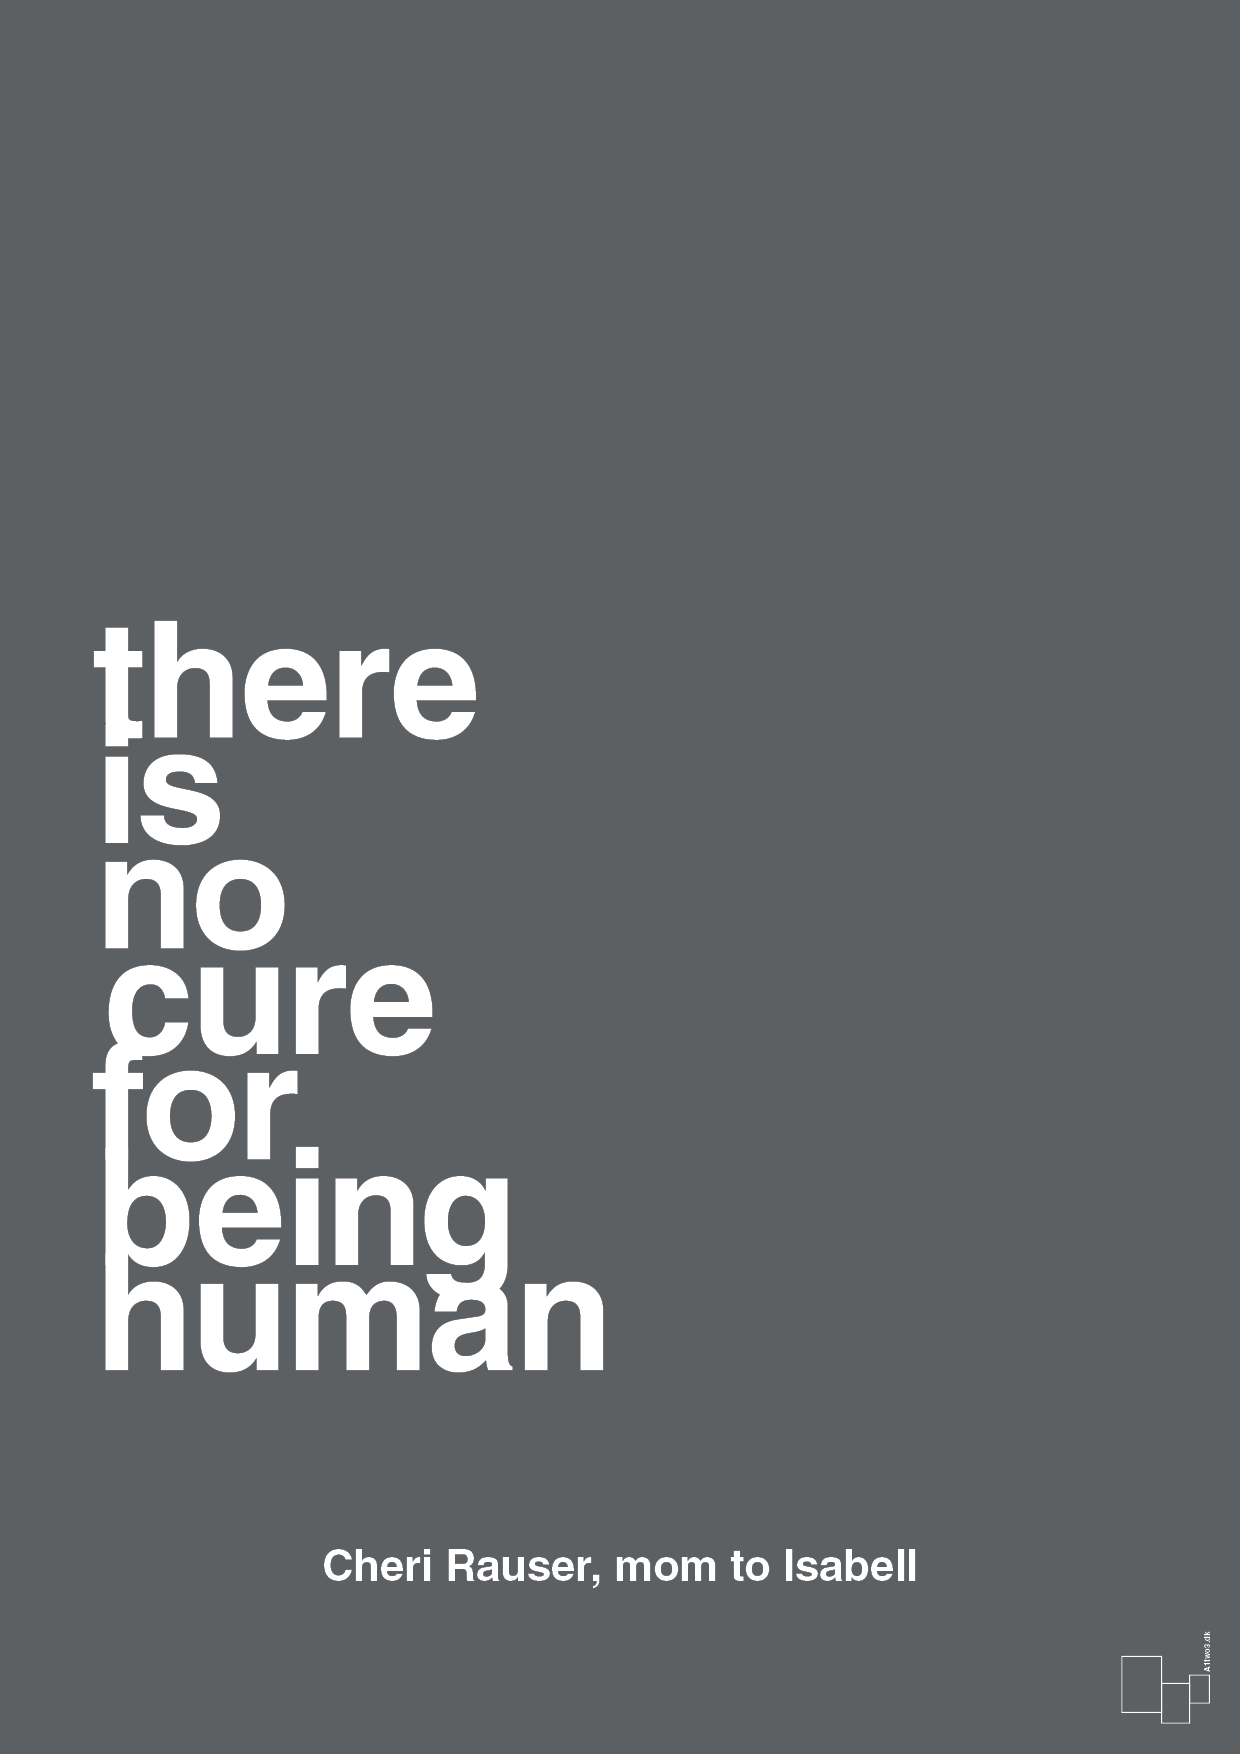 there is no cure for being human - Plakat med Samfund i Graphic Charcoal